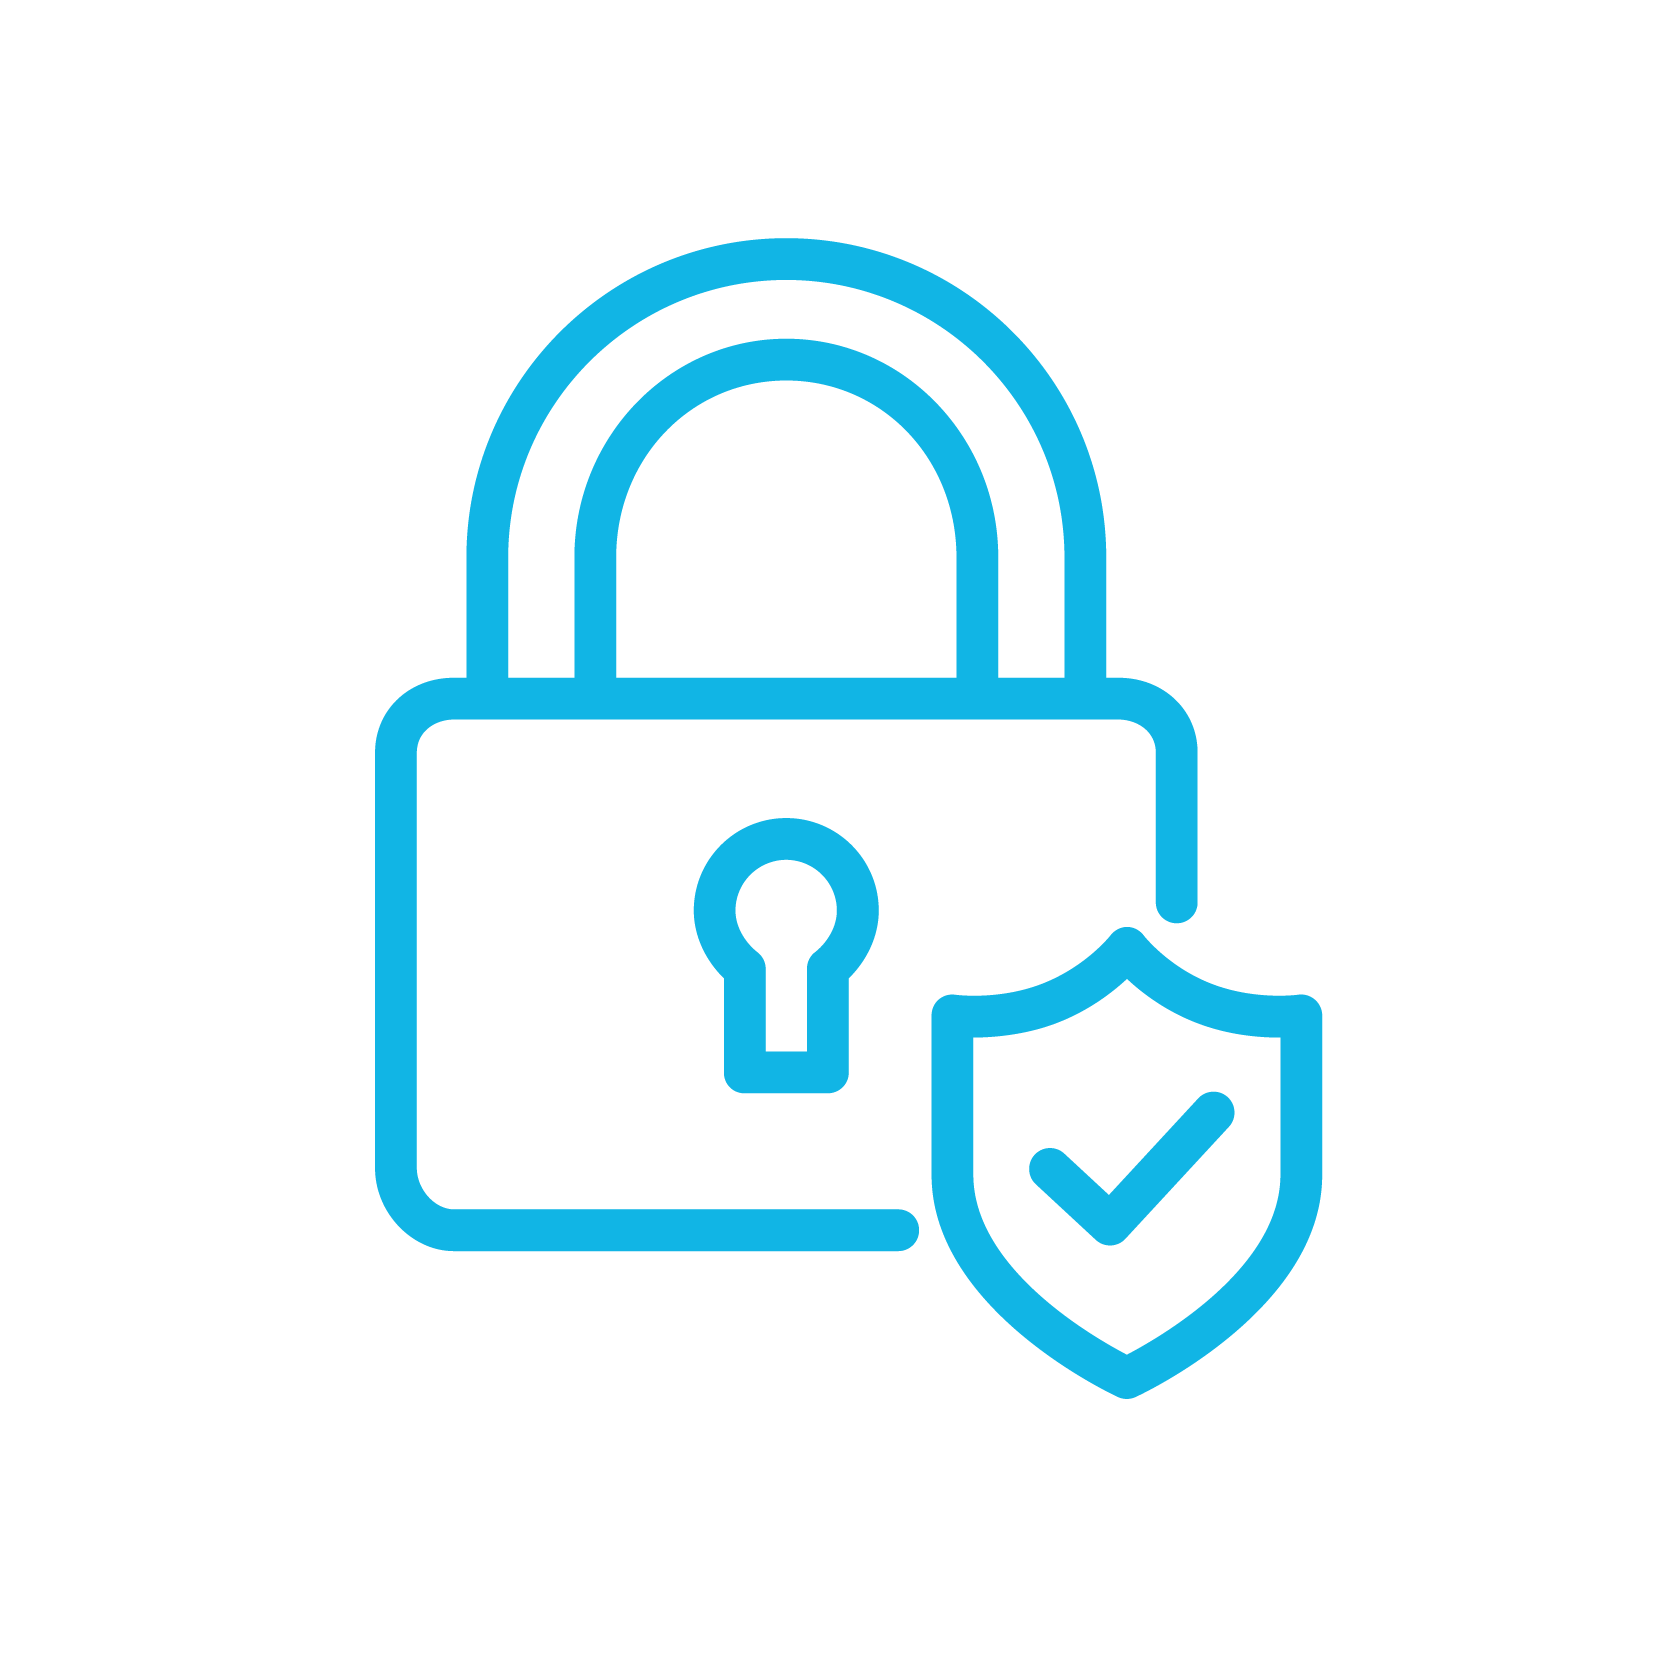 Advanced Security - An icon of a lock with a shield in front of it, and a check-mark on the shield.  This represents the advanced security of information on HammerTech's platform, which exceeds industry standards for data protection, compliance, performance and usability.